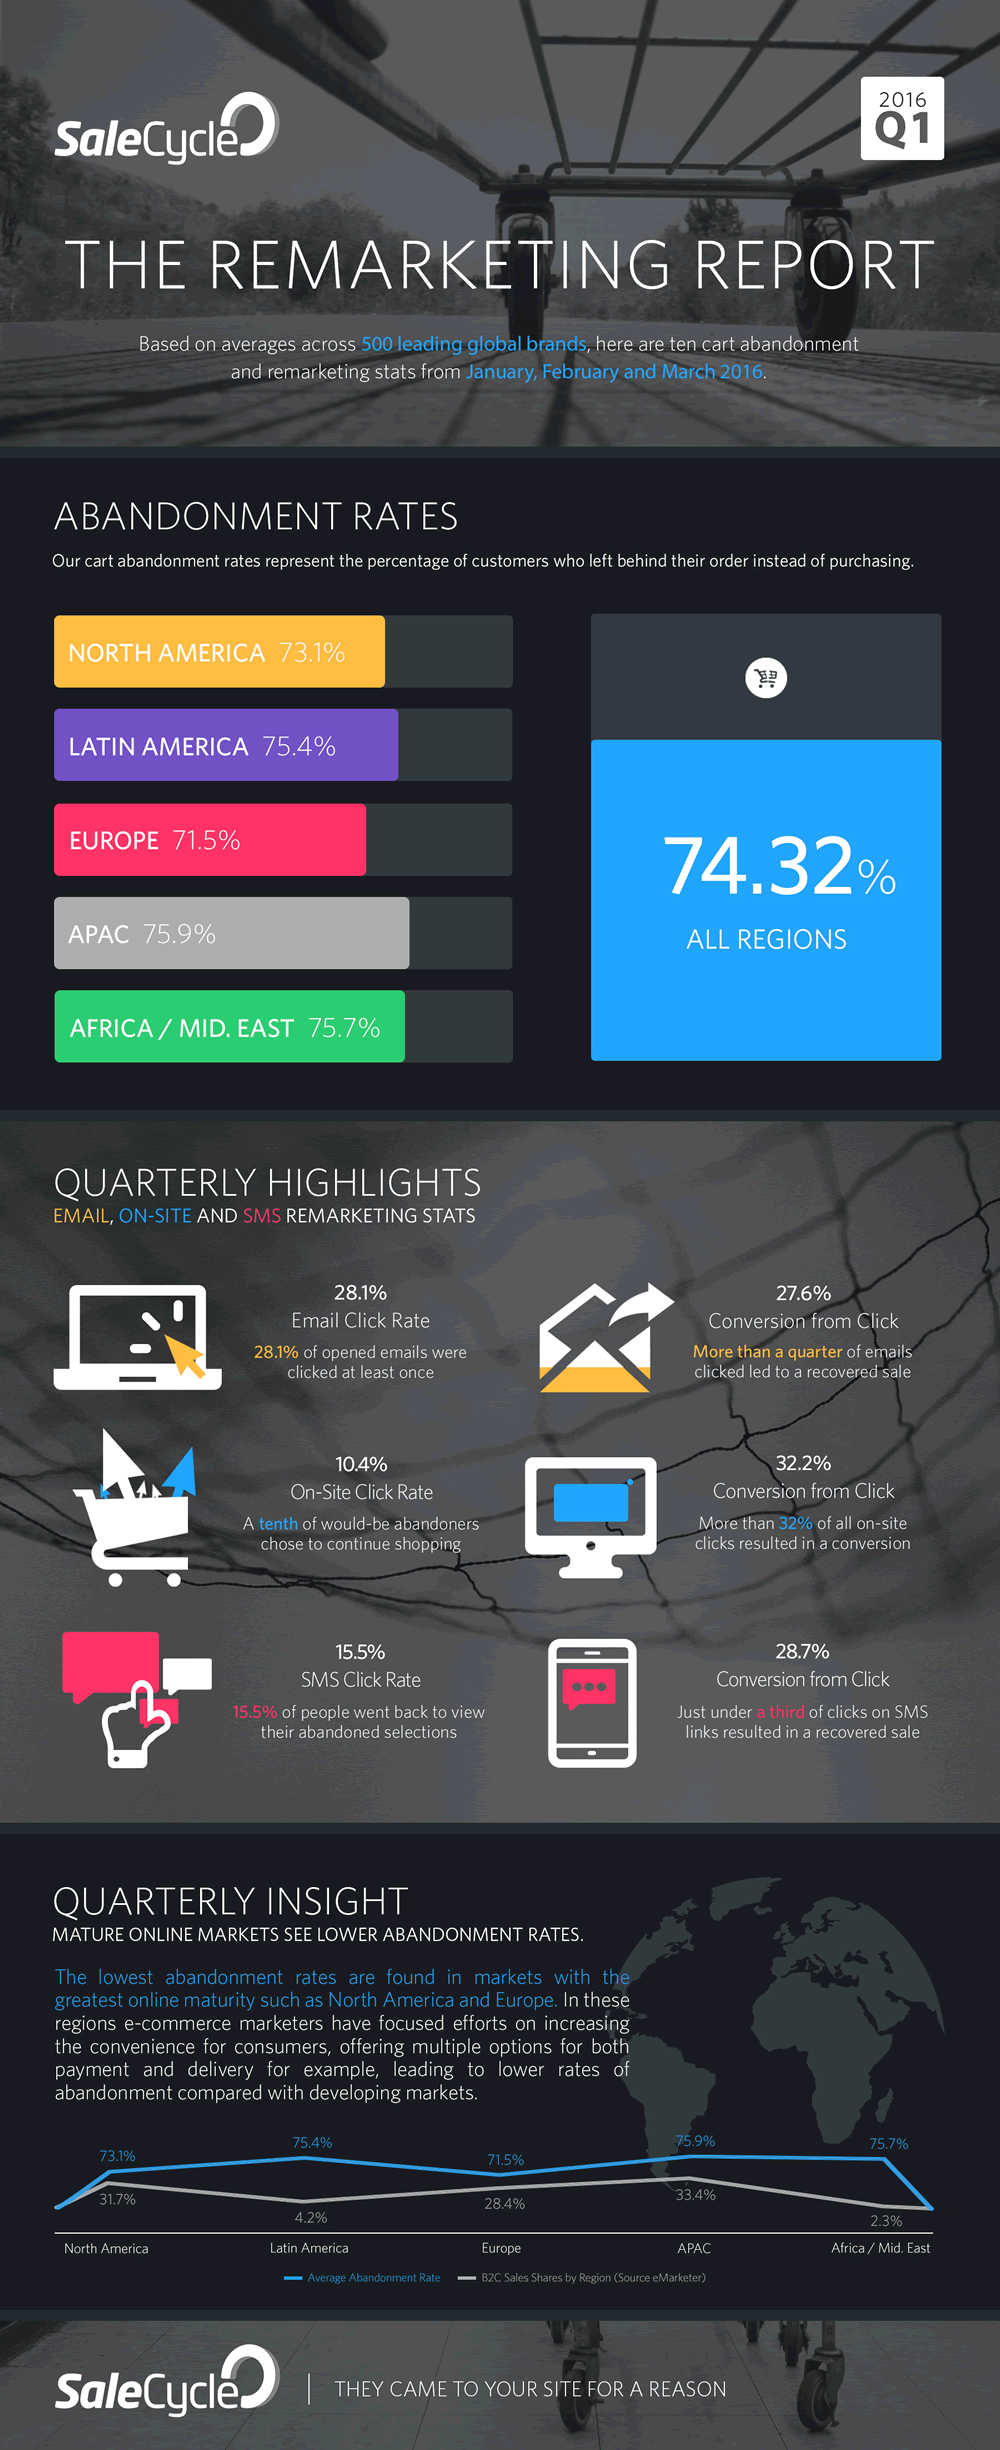 [Infographic] SaleCycle's Q1 2016 Remarketing Report